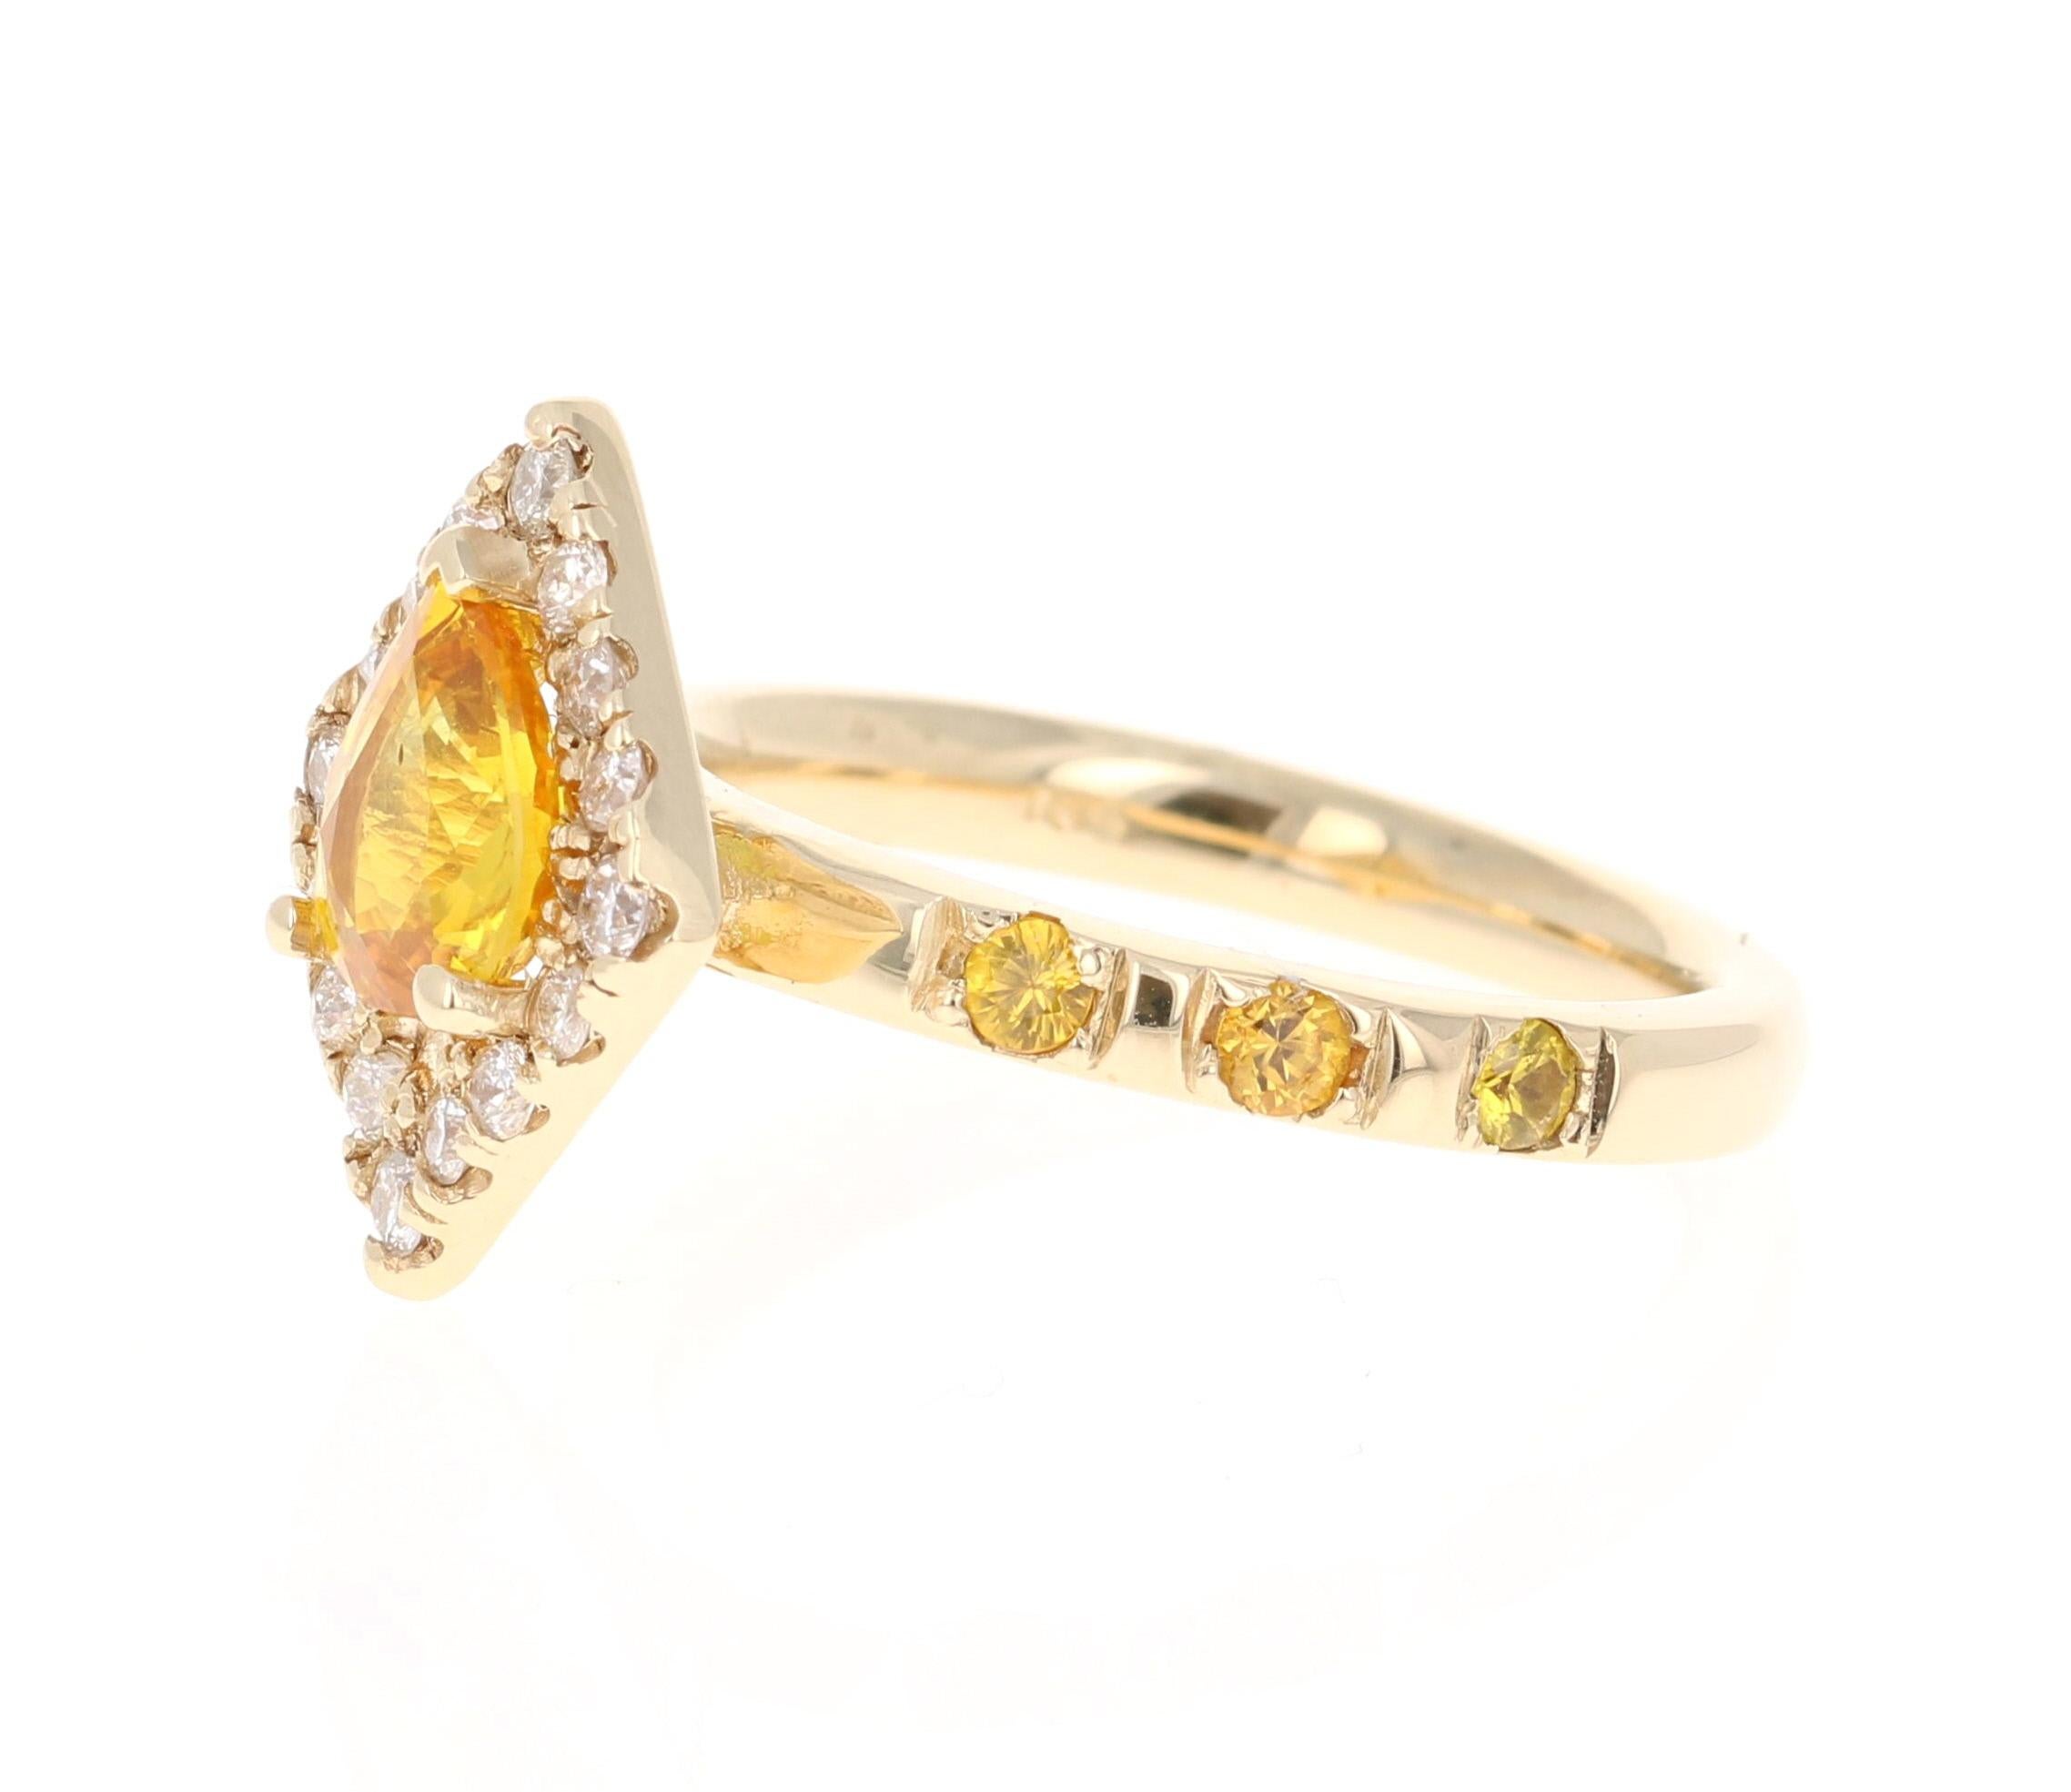 Contemporary 2.01 Carat Yellow Sapphire and Diamond 14 Karat Yellow Gold Ring For Sale